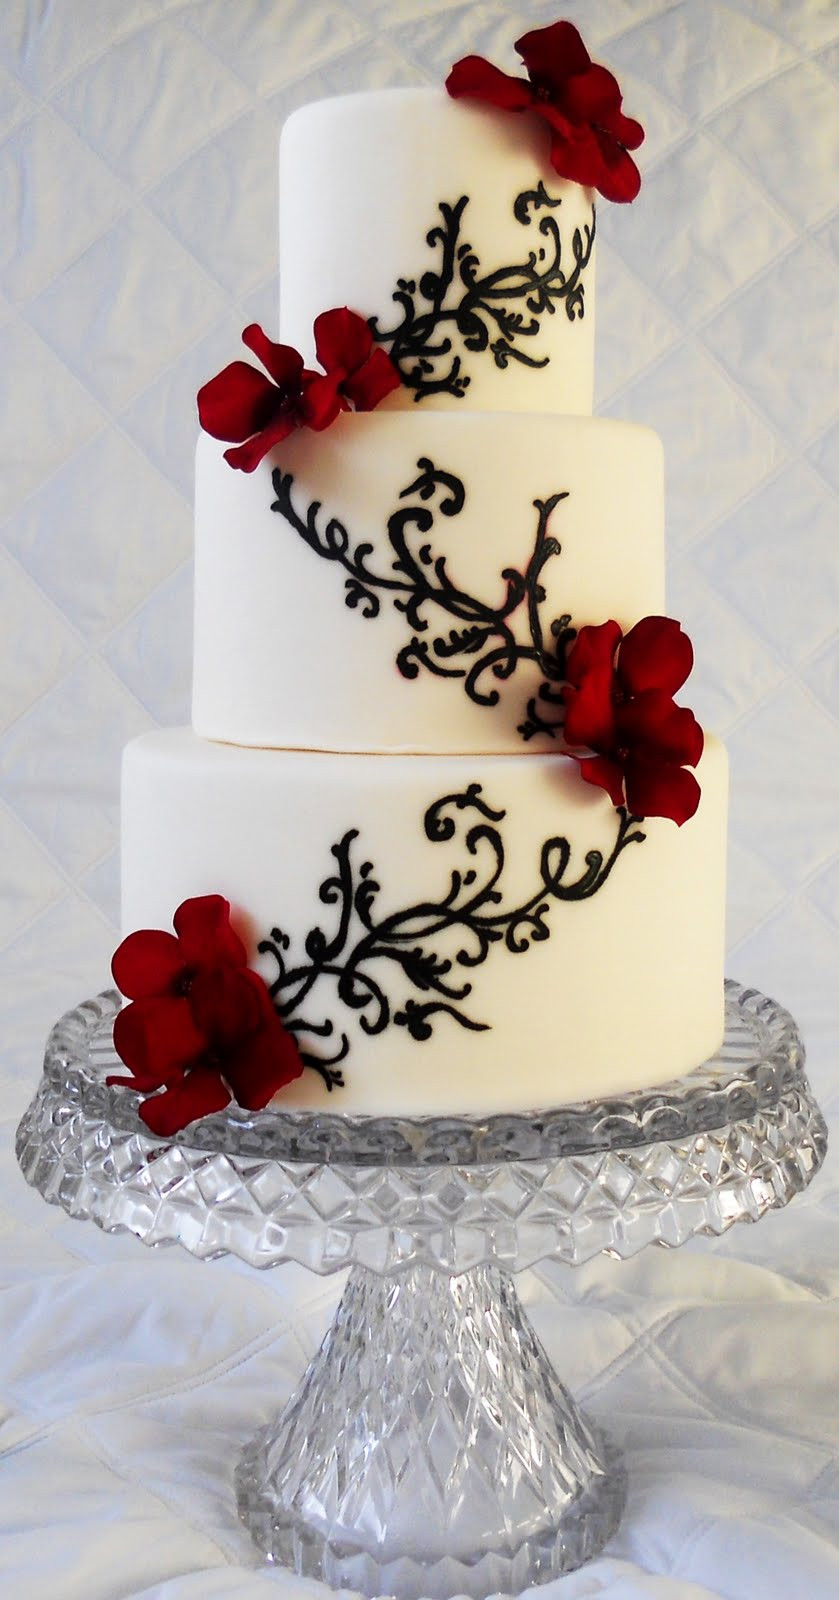 Wedding Cakes Red And White
 Memorable Wedding Find the Best Red Black and White